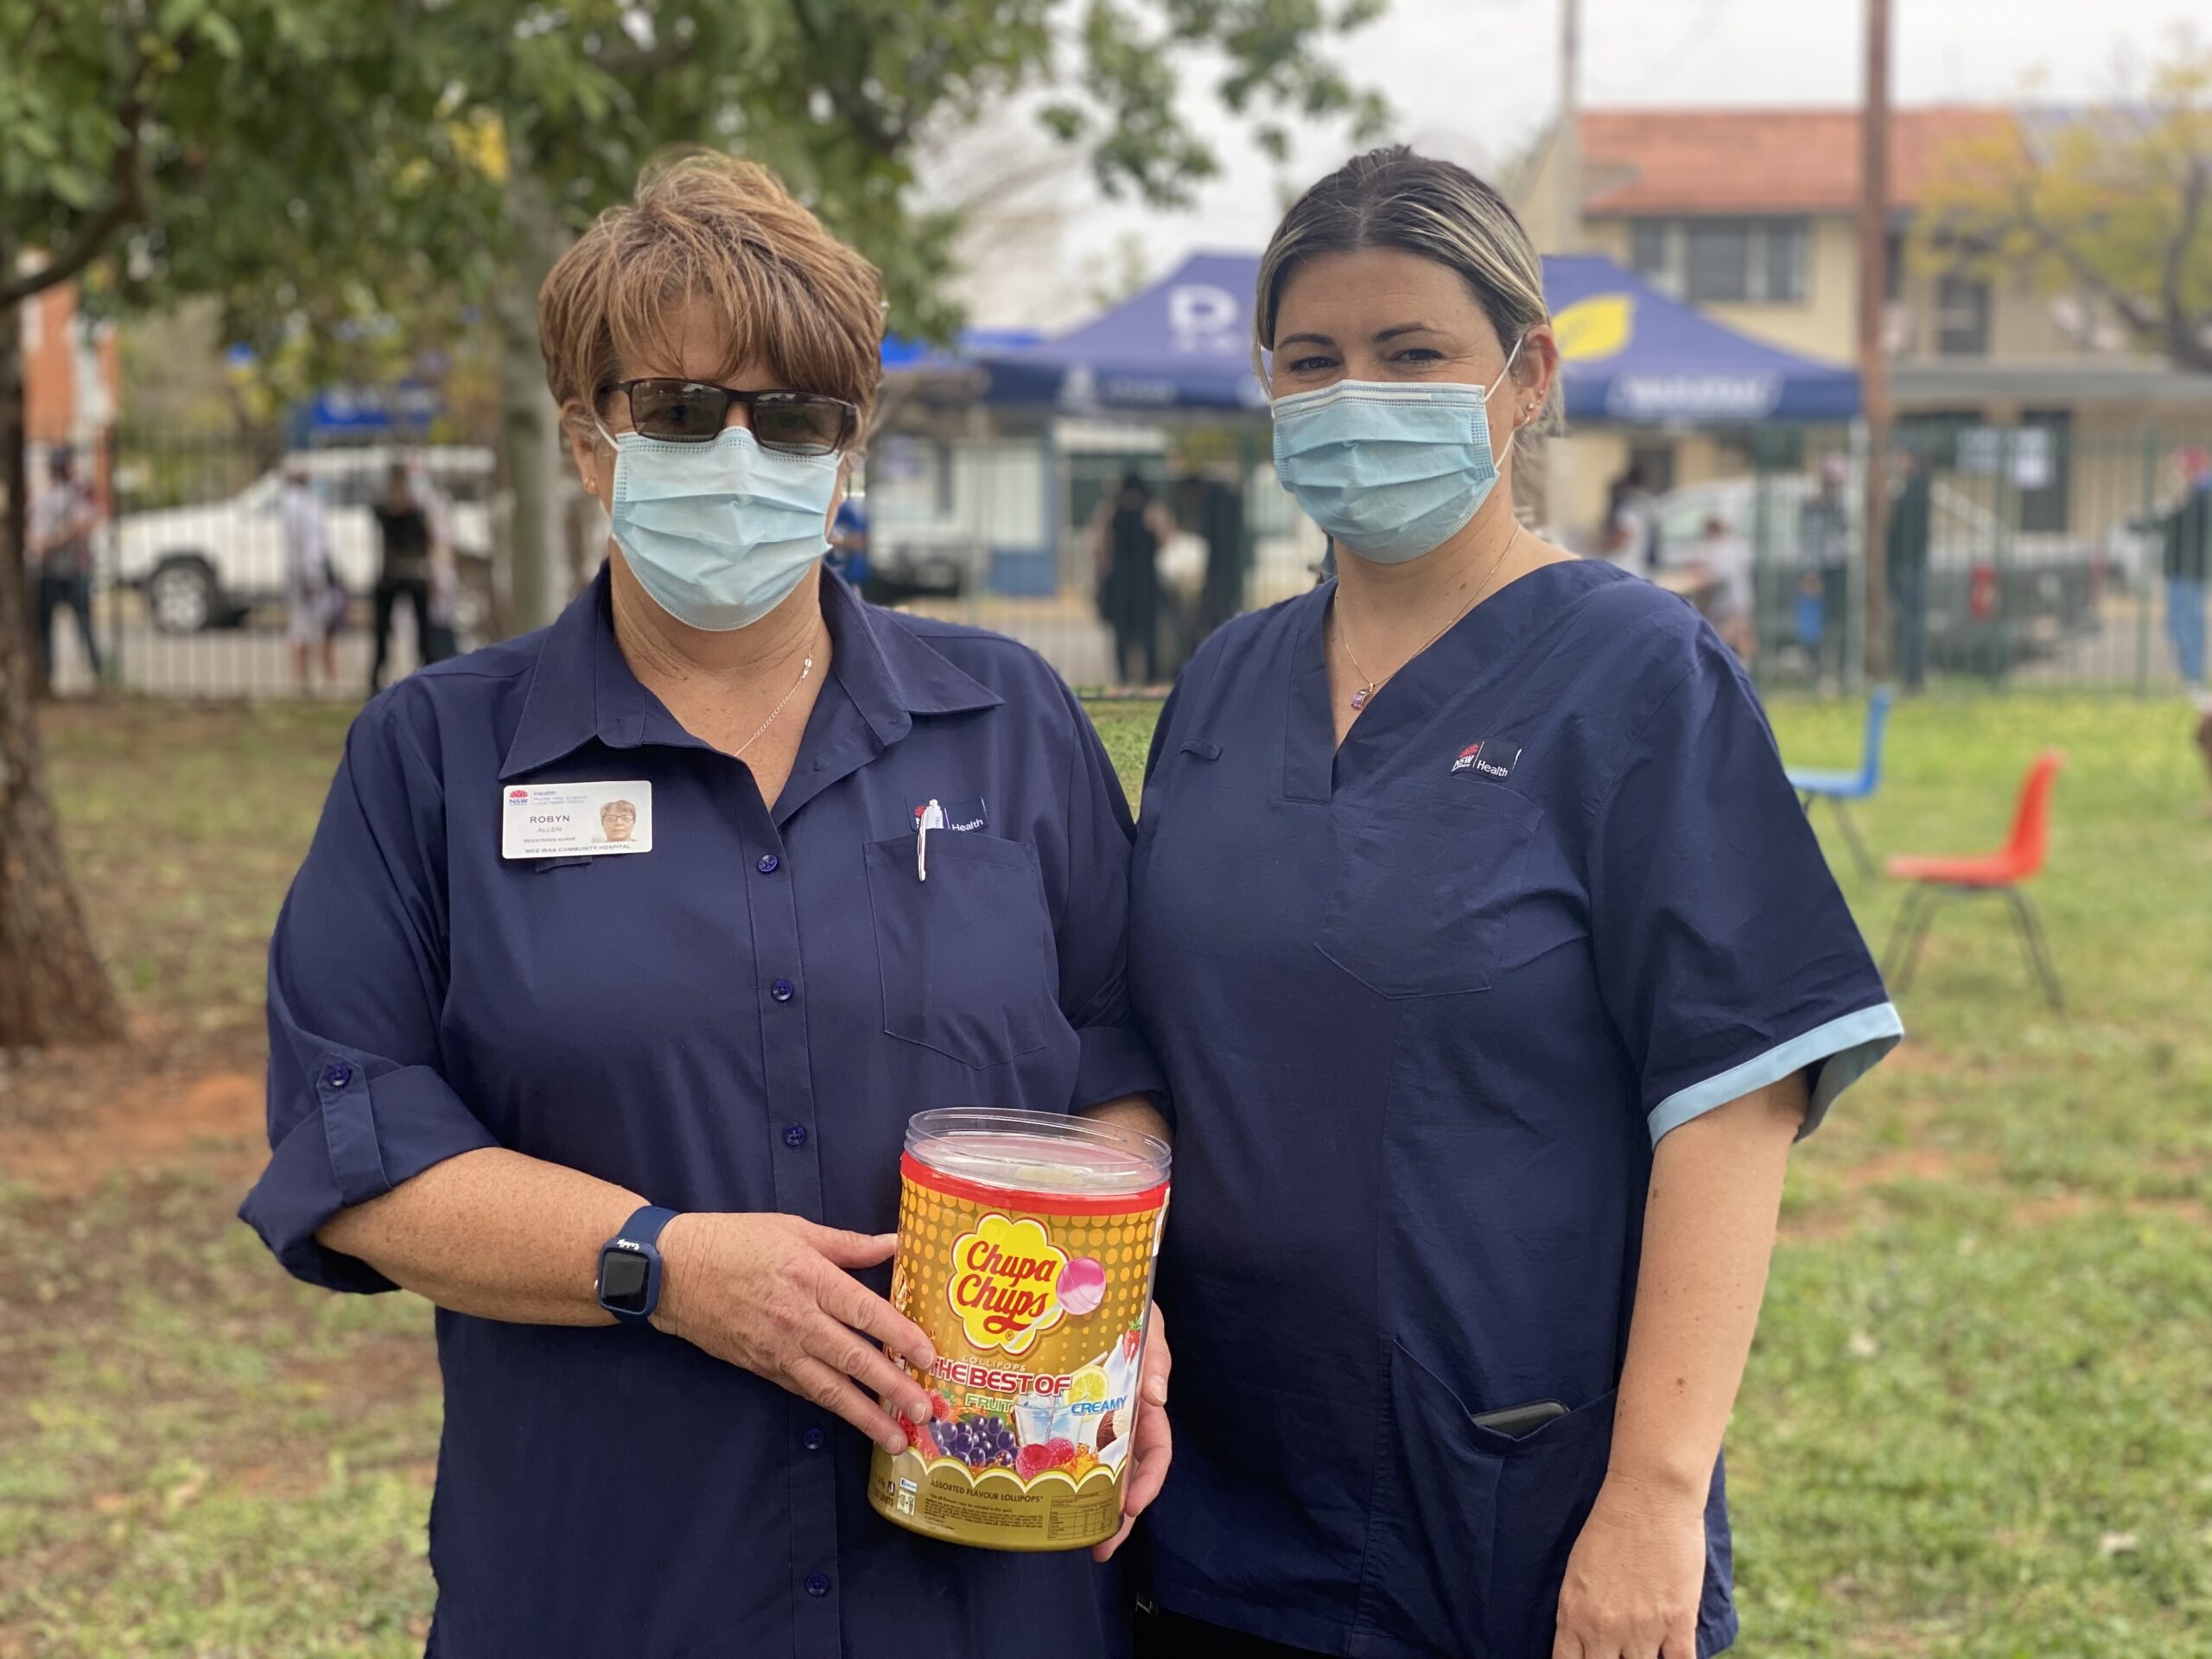 Nurses Robyn Allen and Ammi Russell. Wee Waa Community Hospital nurses made getting the vaccine less painful by kindly offering lollipops.